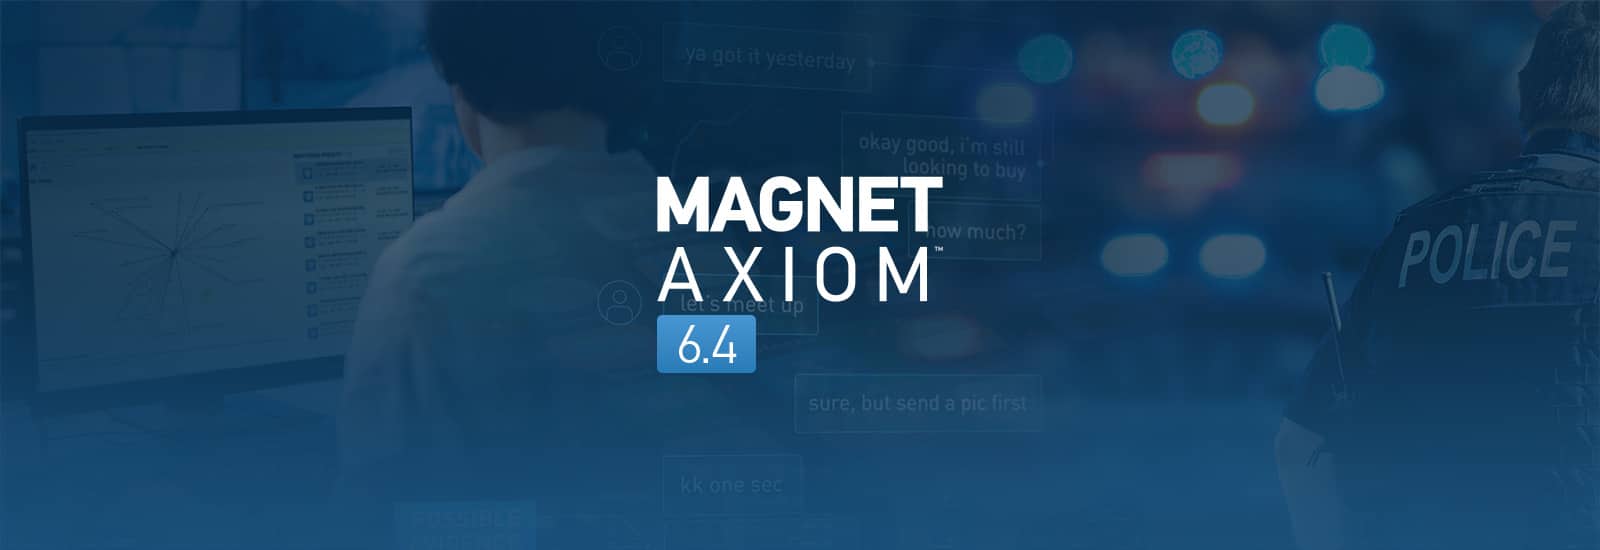 A decorative header for the Magnet AXIOM 6.4 release